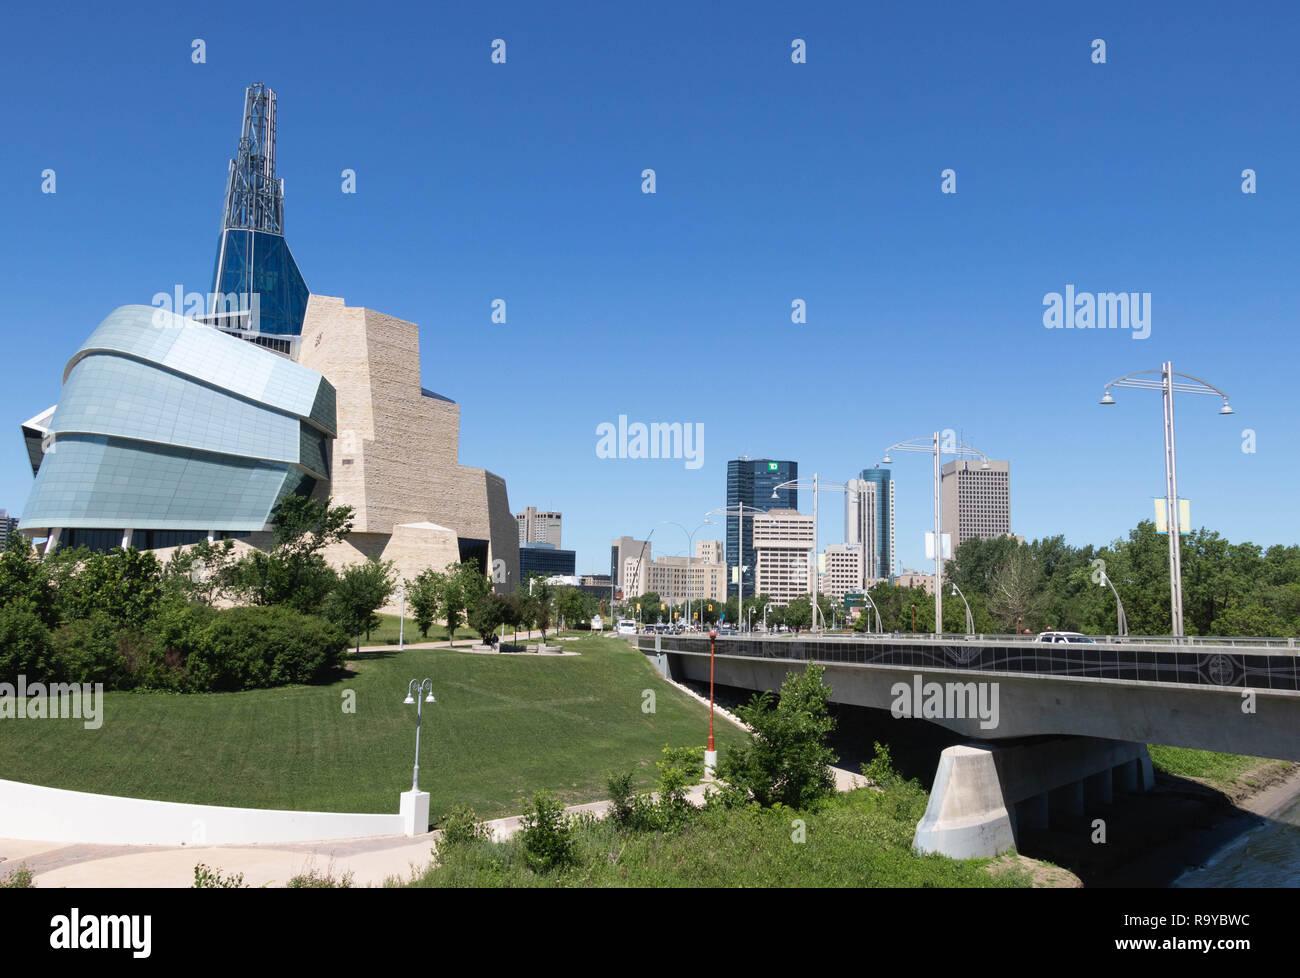 The Canadian Museum of Human Rights - Winnipeg, Manitoba, Canada. Cityscape in Summer with futuristic architecture Stock Photo